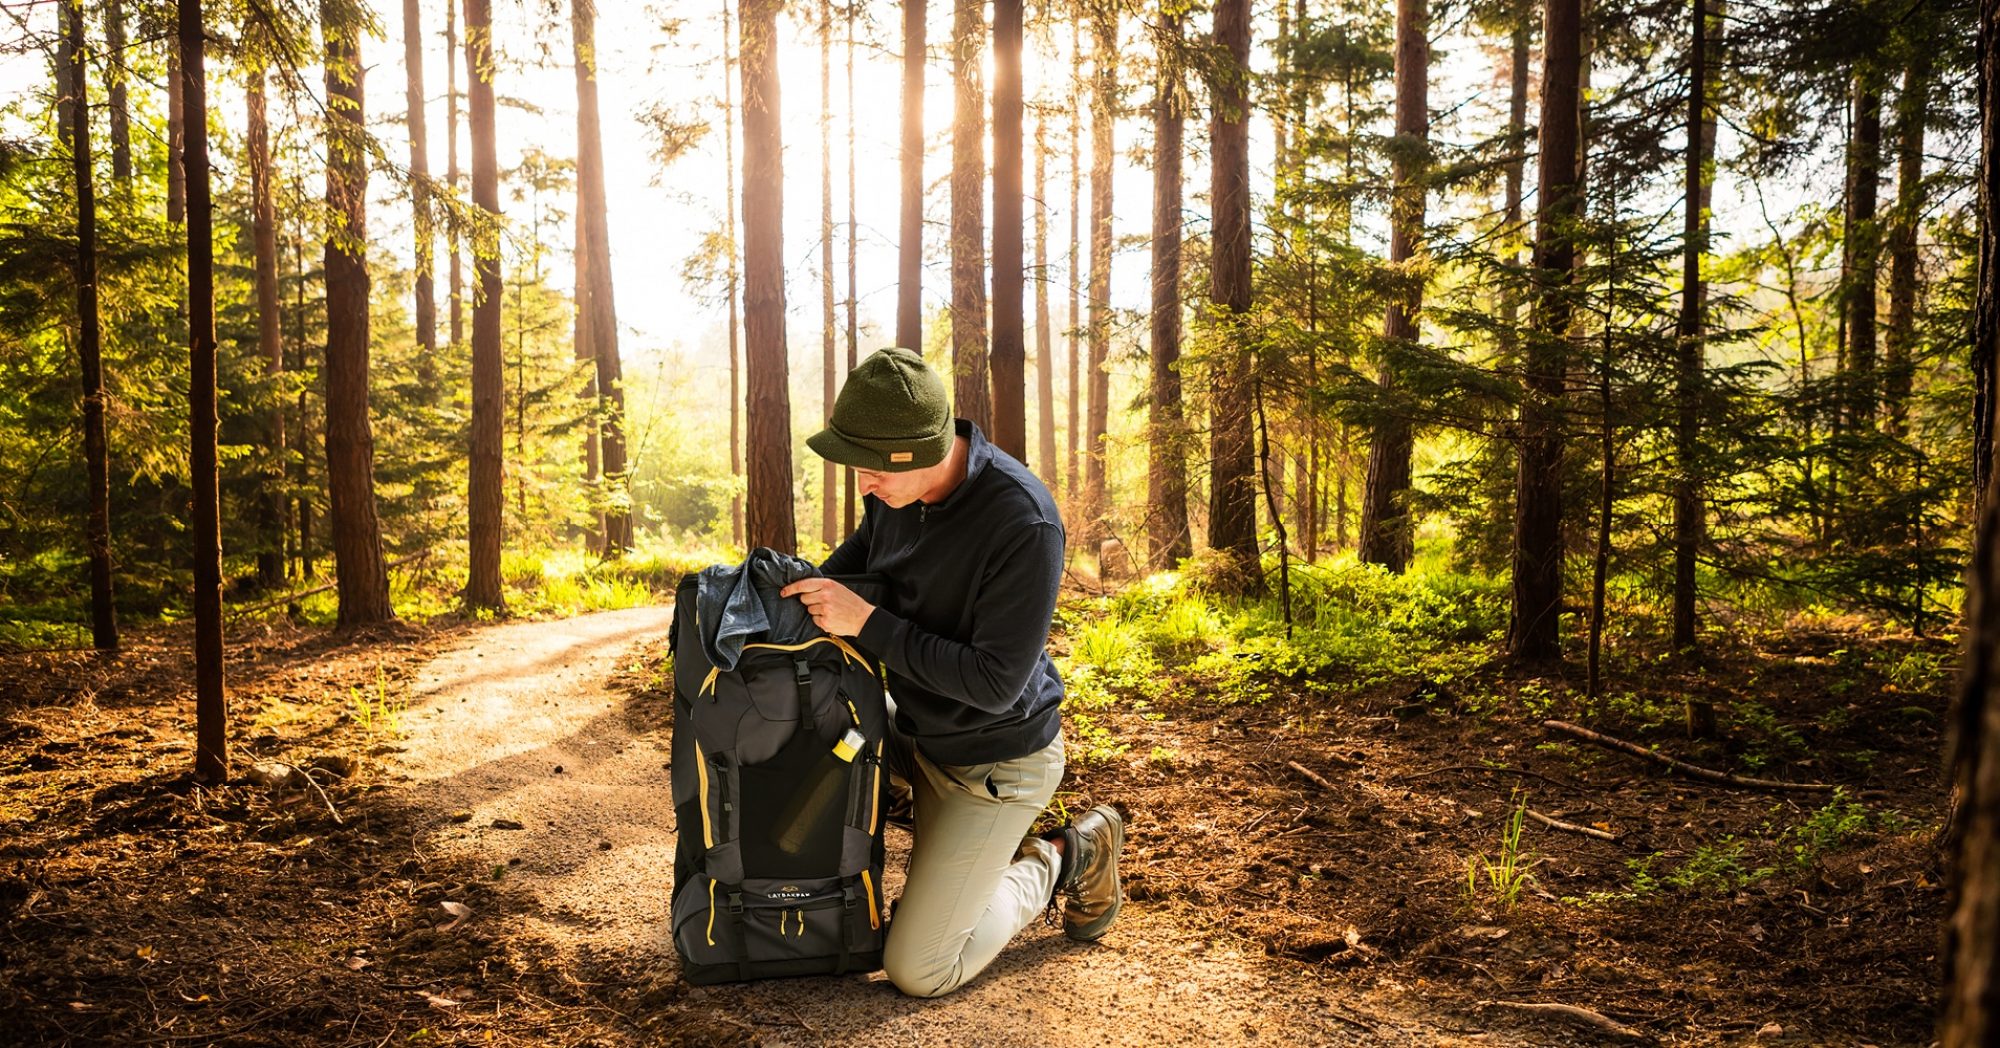 Man starting to unpack LayBakPak bag to set up camp in a woodland clearing